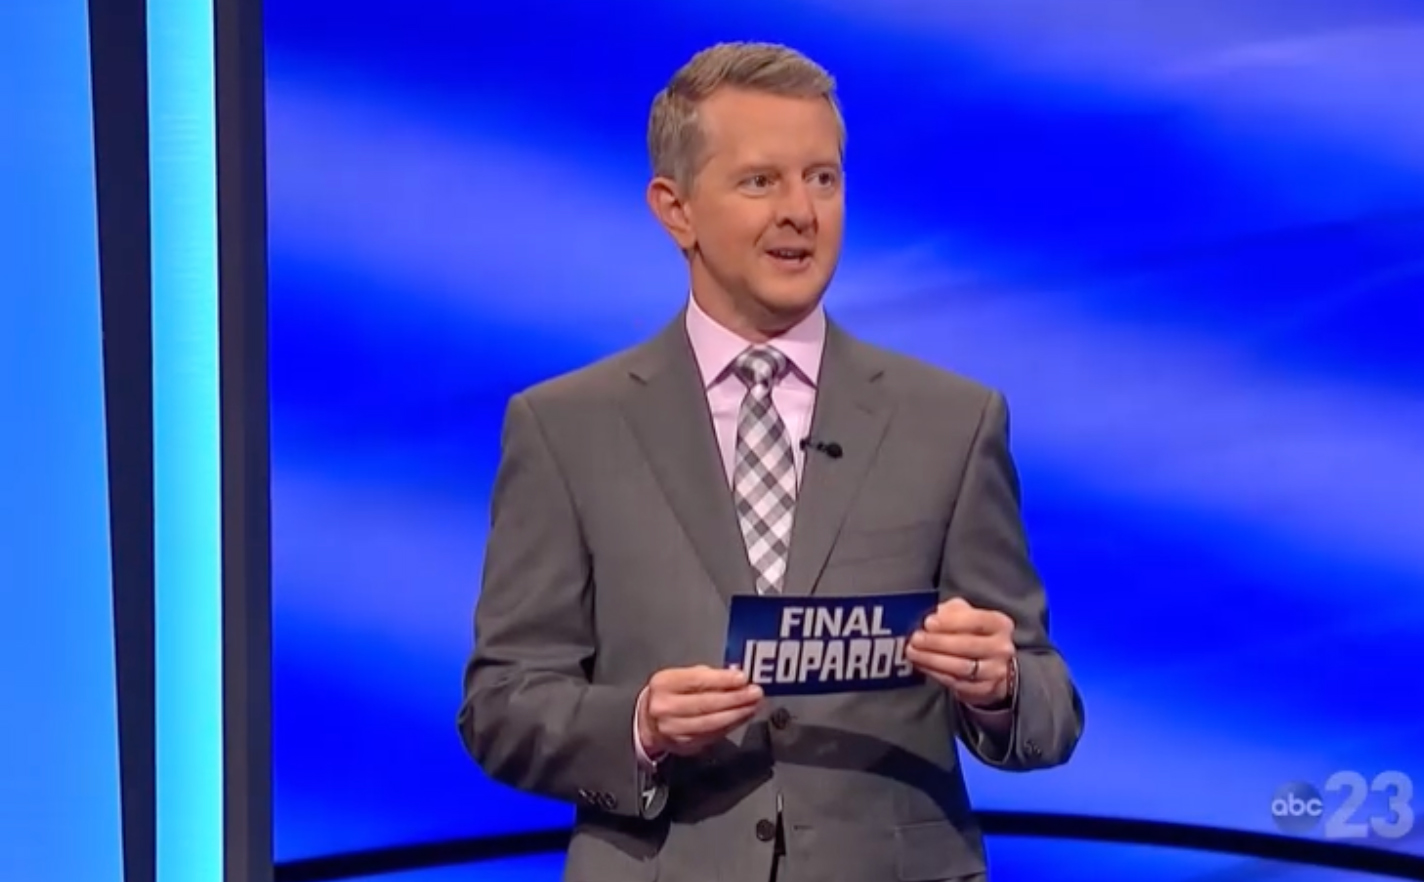 Jeopardy!, hosted by Ken Jennings, revealed that no champion has ever won exactly 10 games, posting the tidbit days after Isaac Hirsch lost in game nine